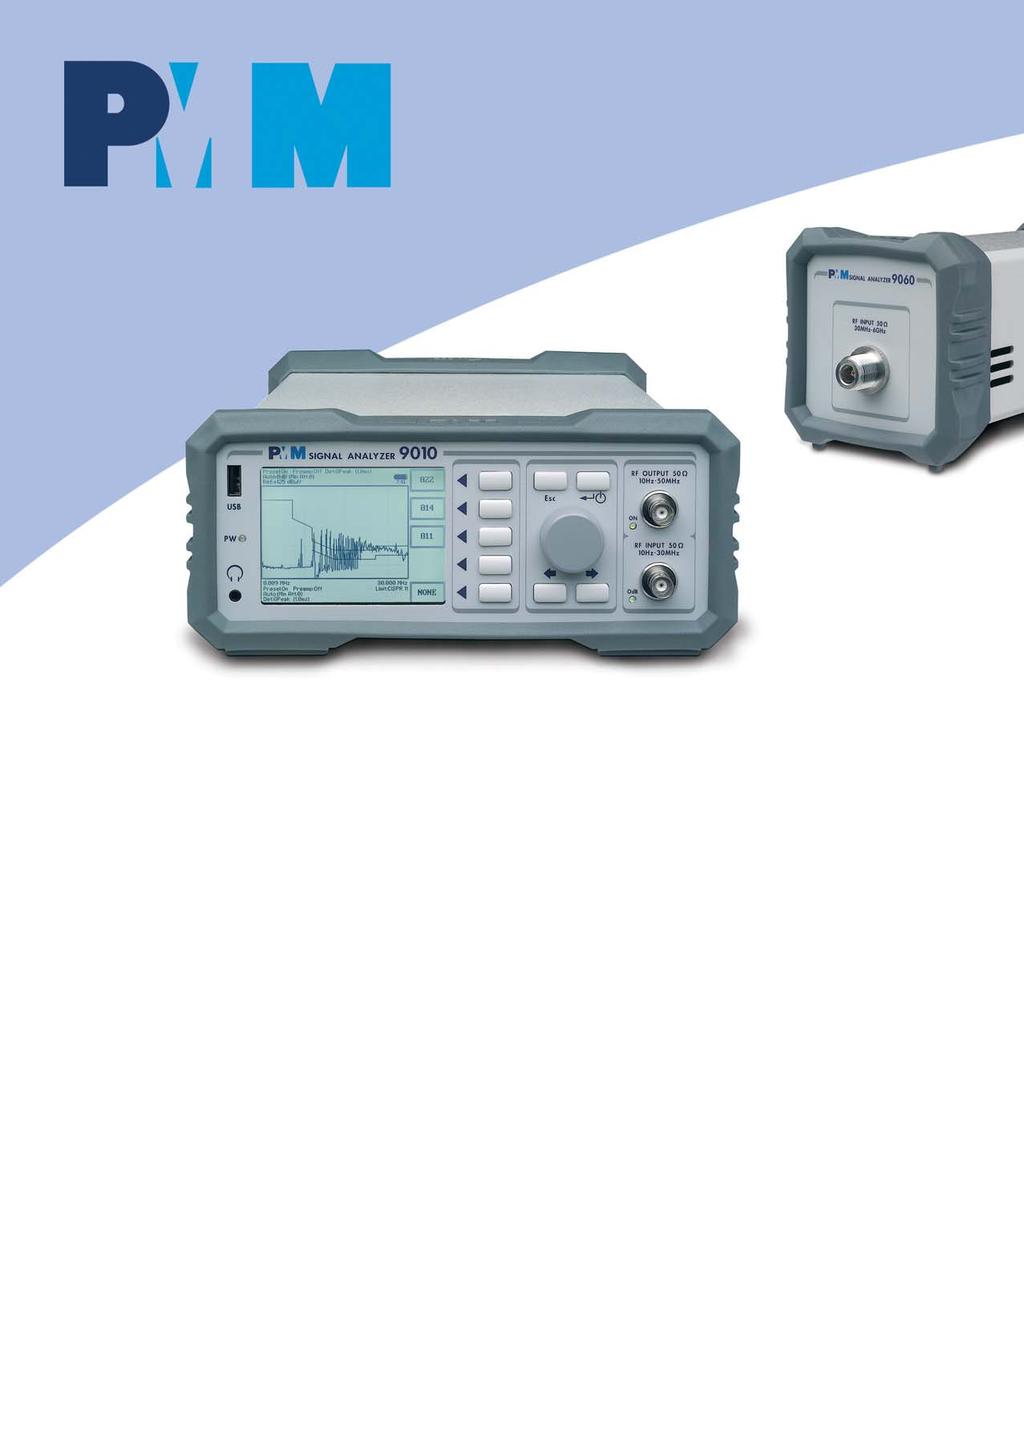 PMM 9010 PMM 9030 PMM 9060 Main features at a glance Traditional Receiver The state-of-the-art full compliance 30 MHz EMI Digital Receiver is the platform of the system.